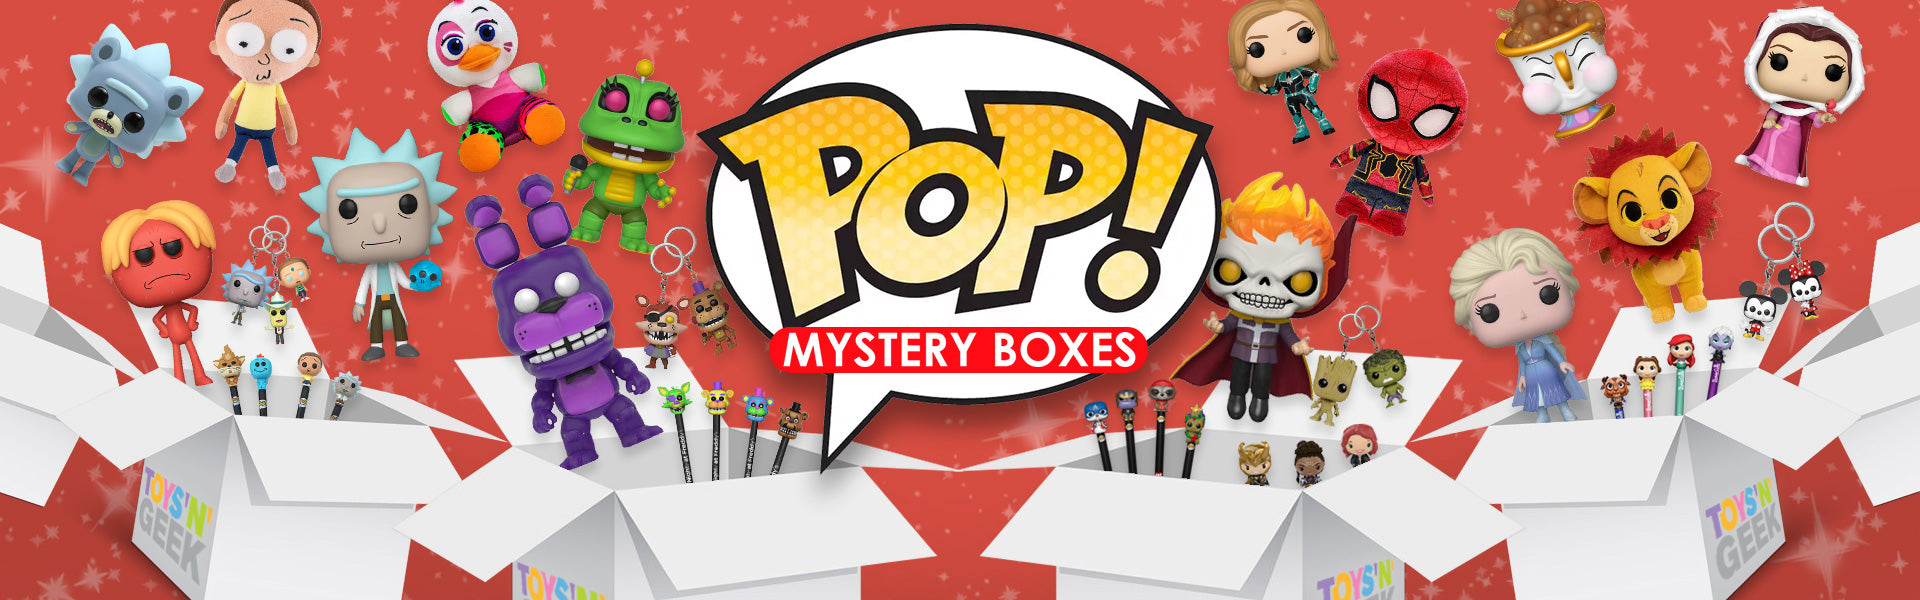 Funko Pop Mystery Boxes by Toys'N'Geek